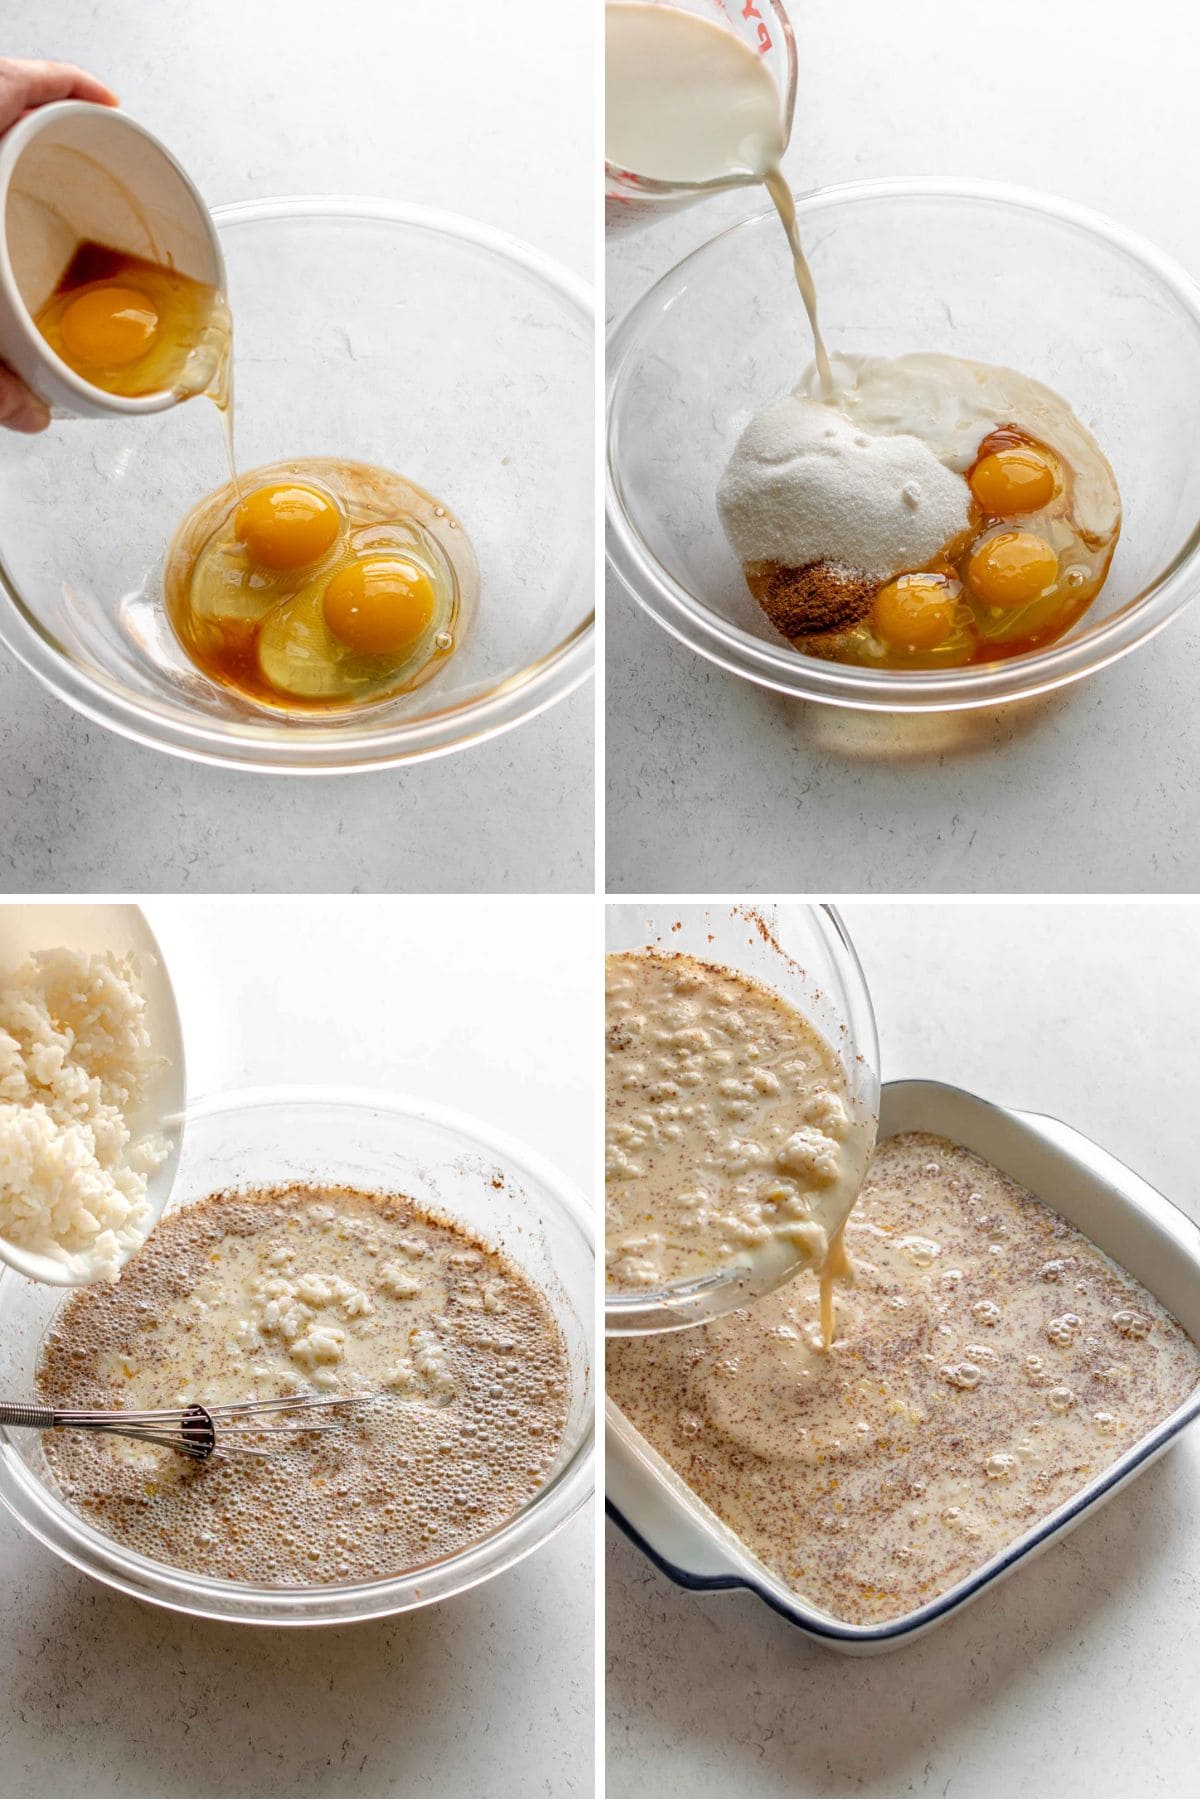 Baked Rice Pudding preparation in 4 steps collage